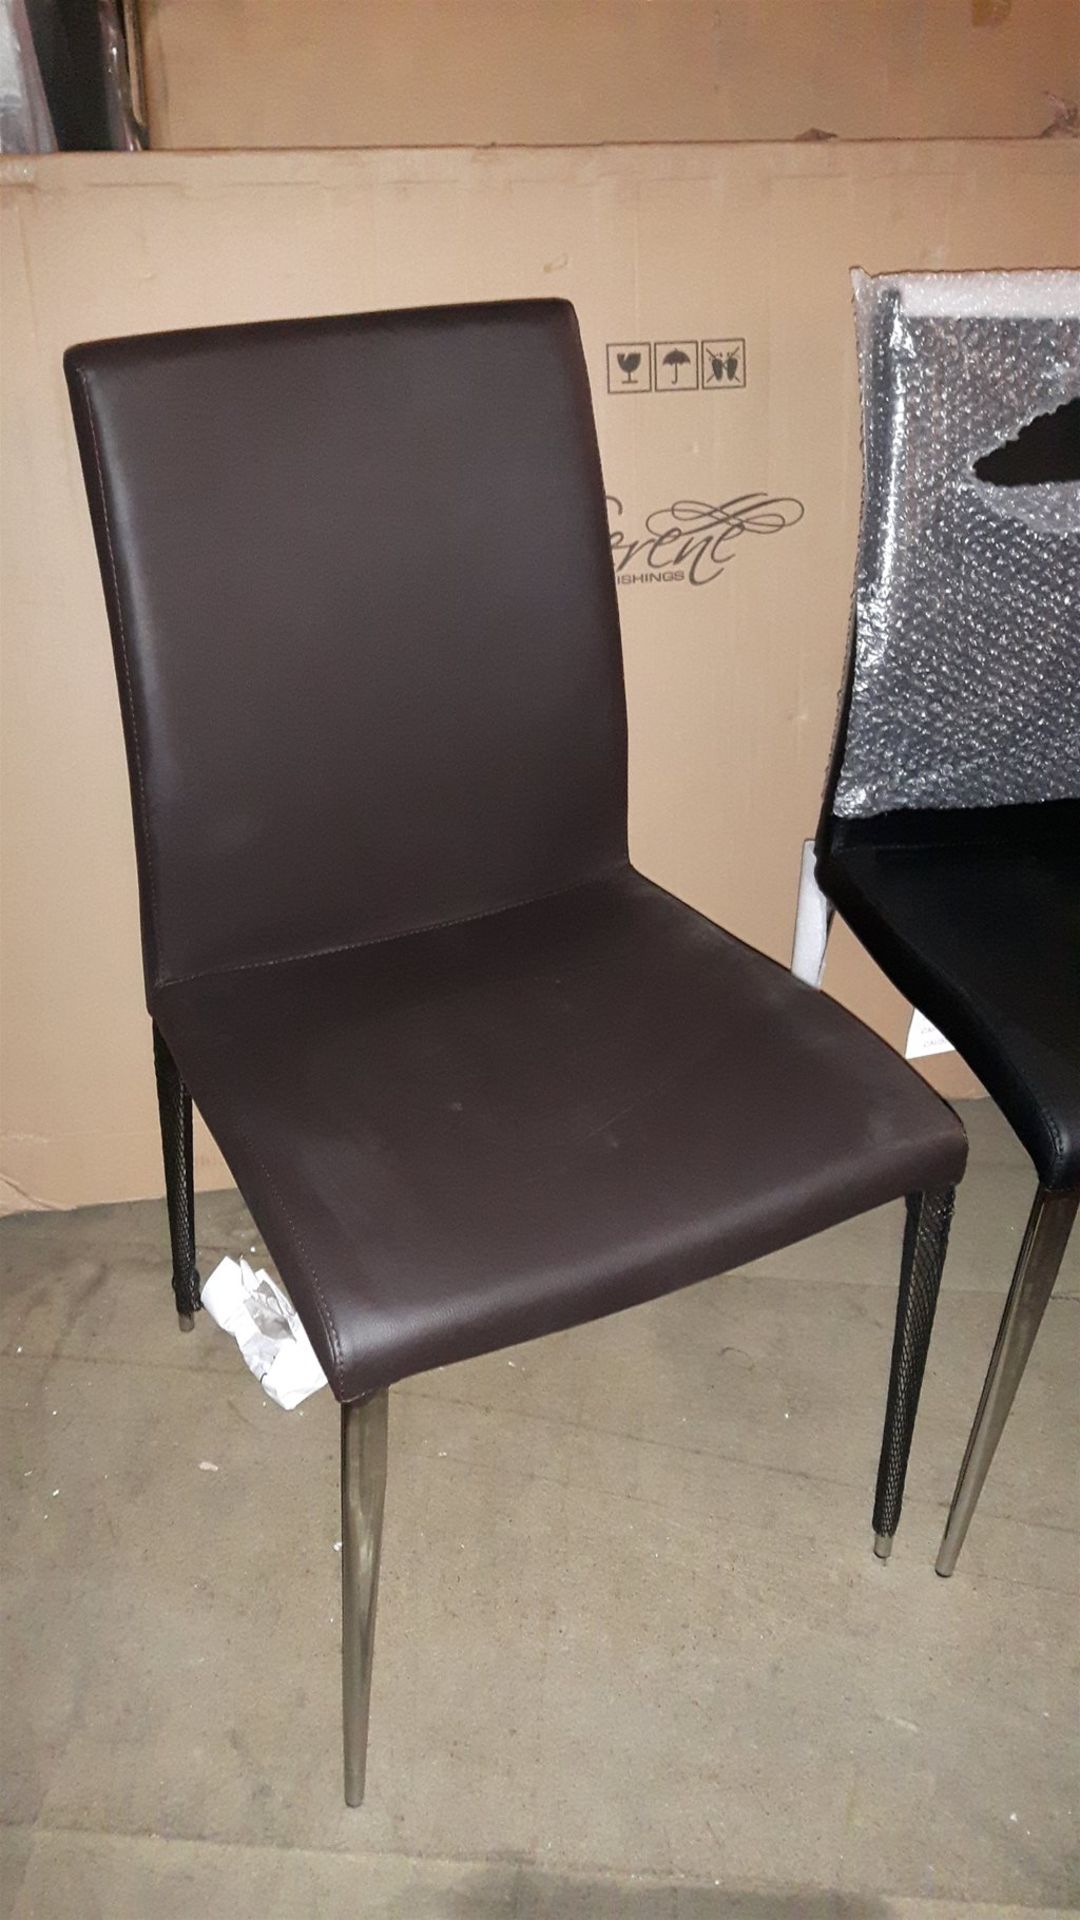 3 Black faux leather dining chairs with chrome legs - Image 3 of 3